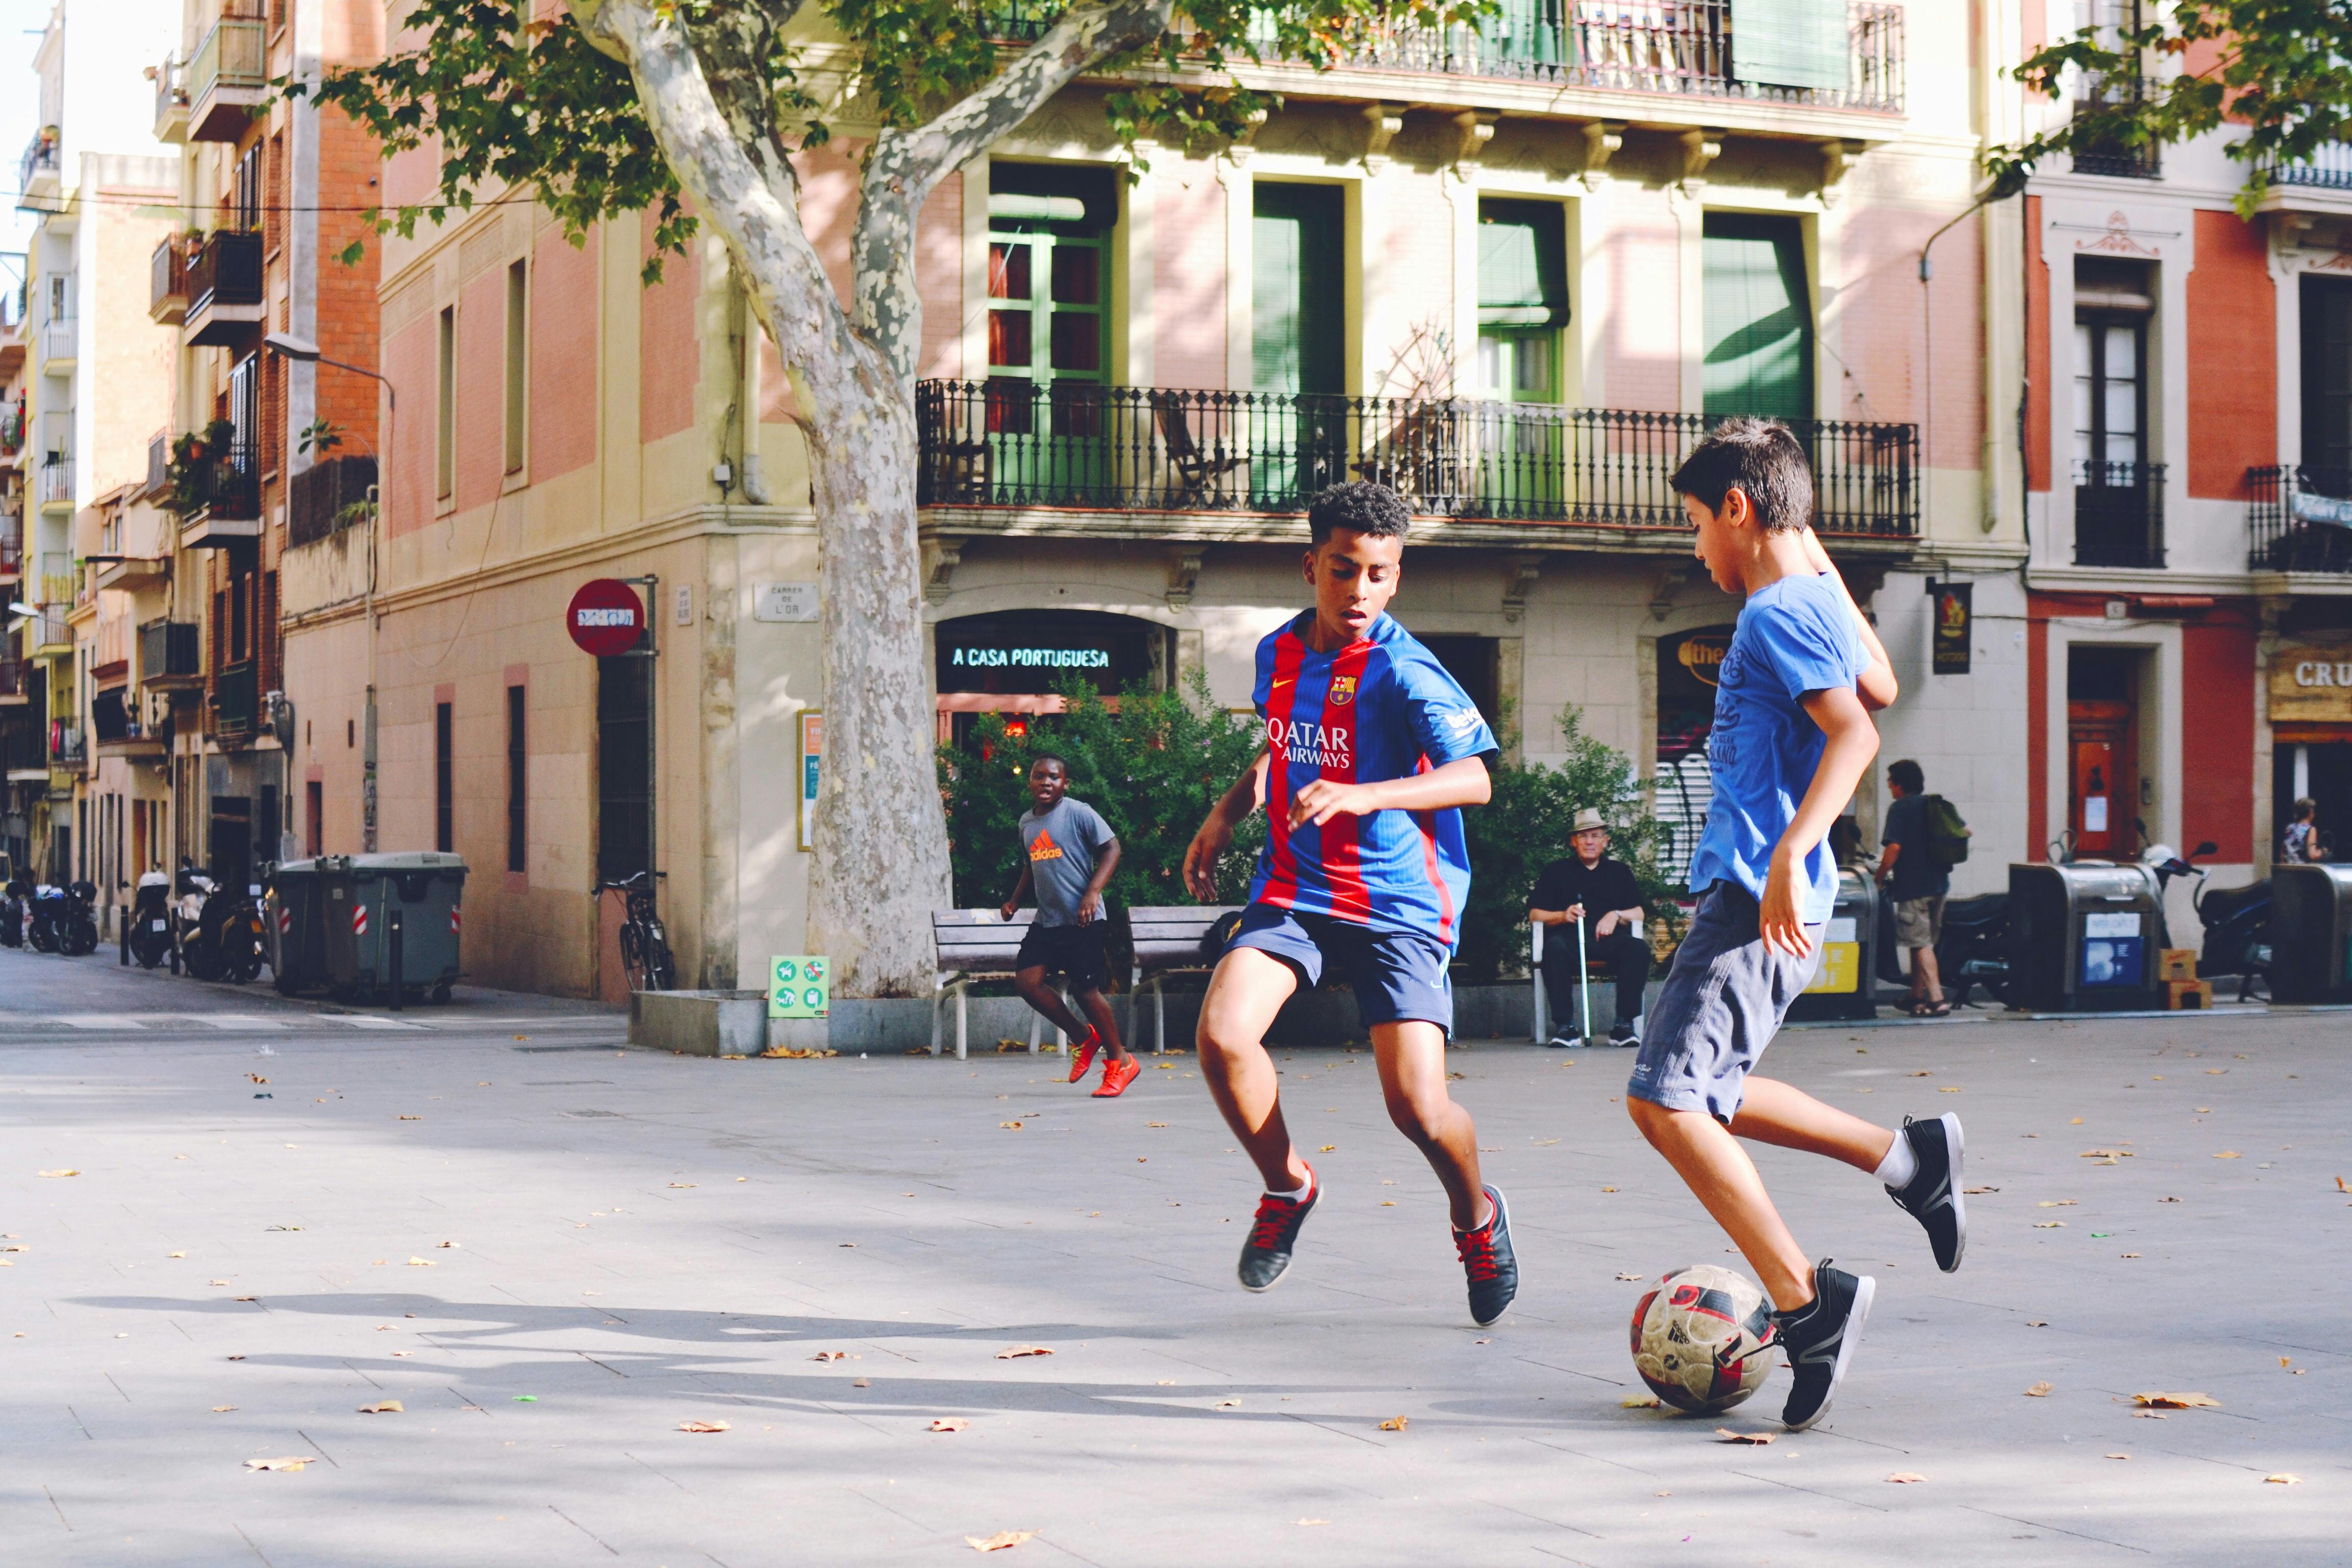 Playing soccer in Barcelona